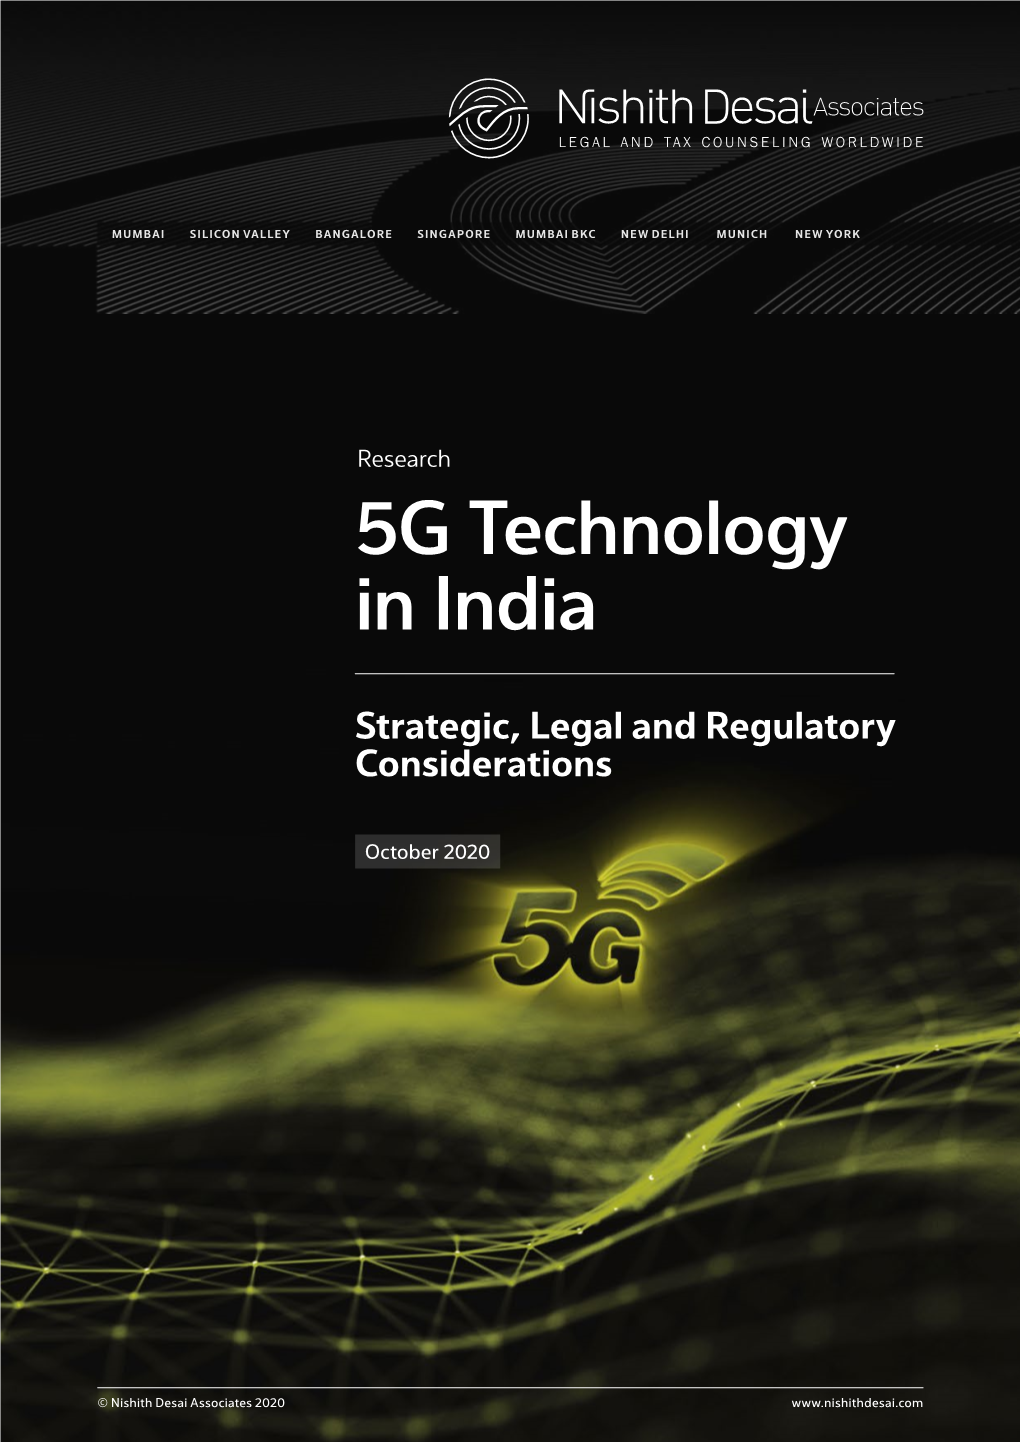 5G Technology in India Strategic, Legal and Regulatory Considerations